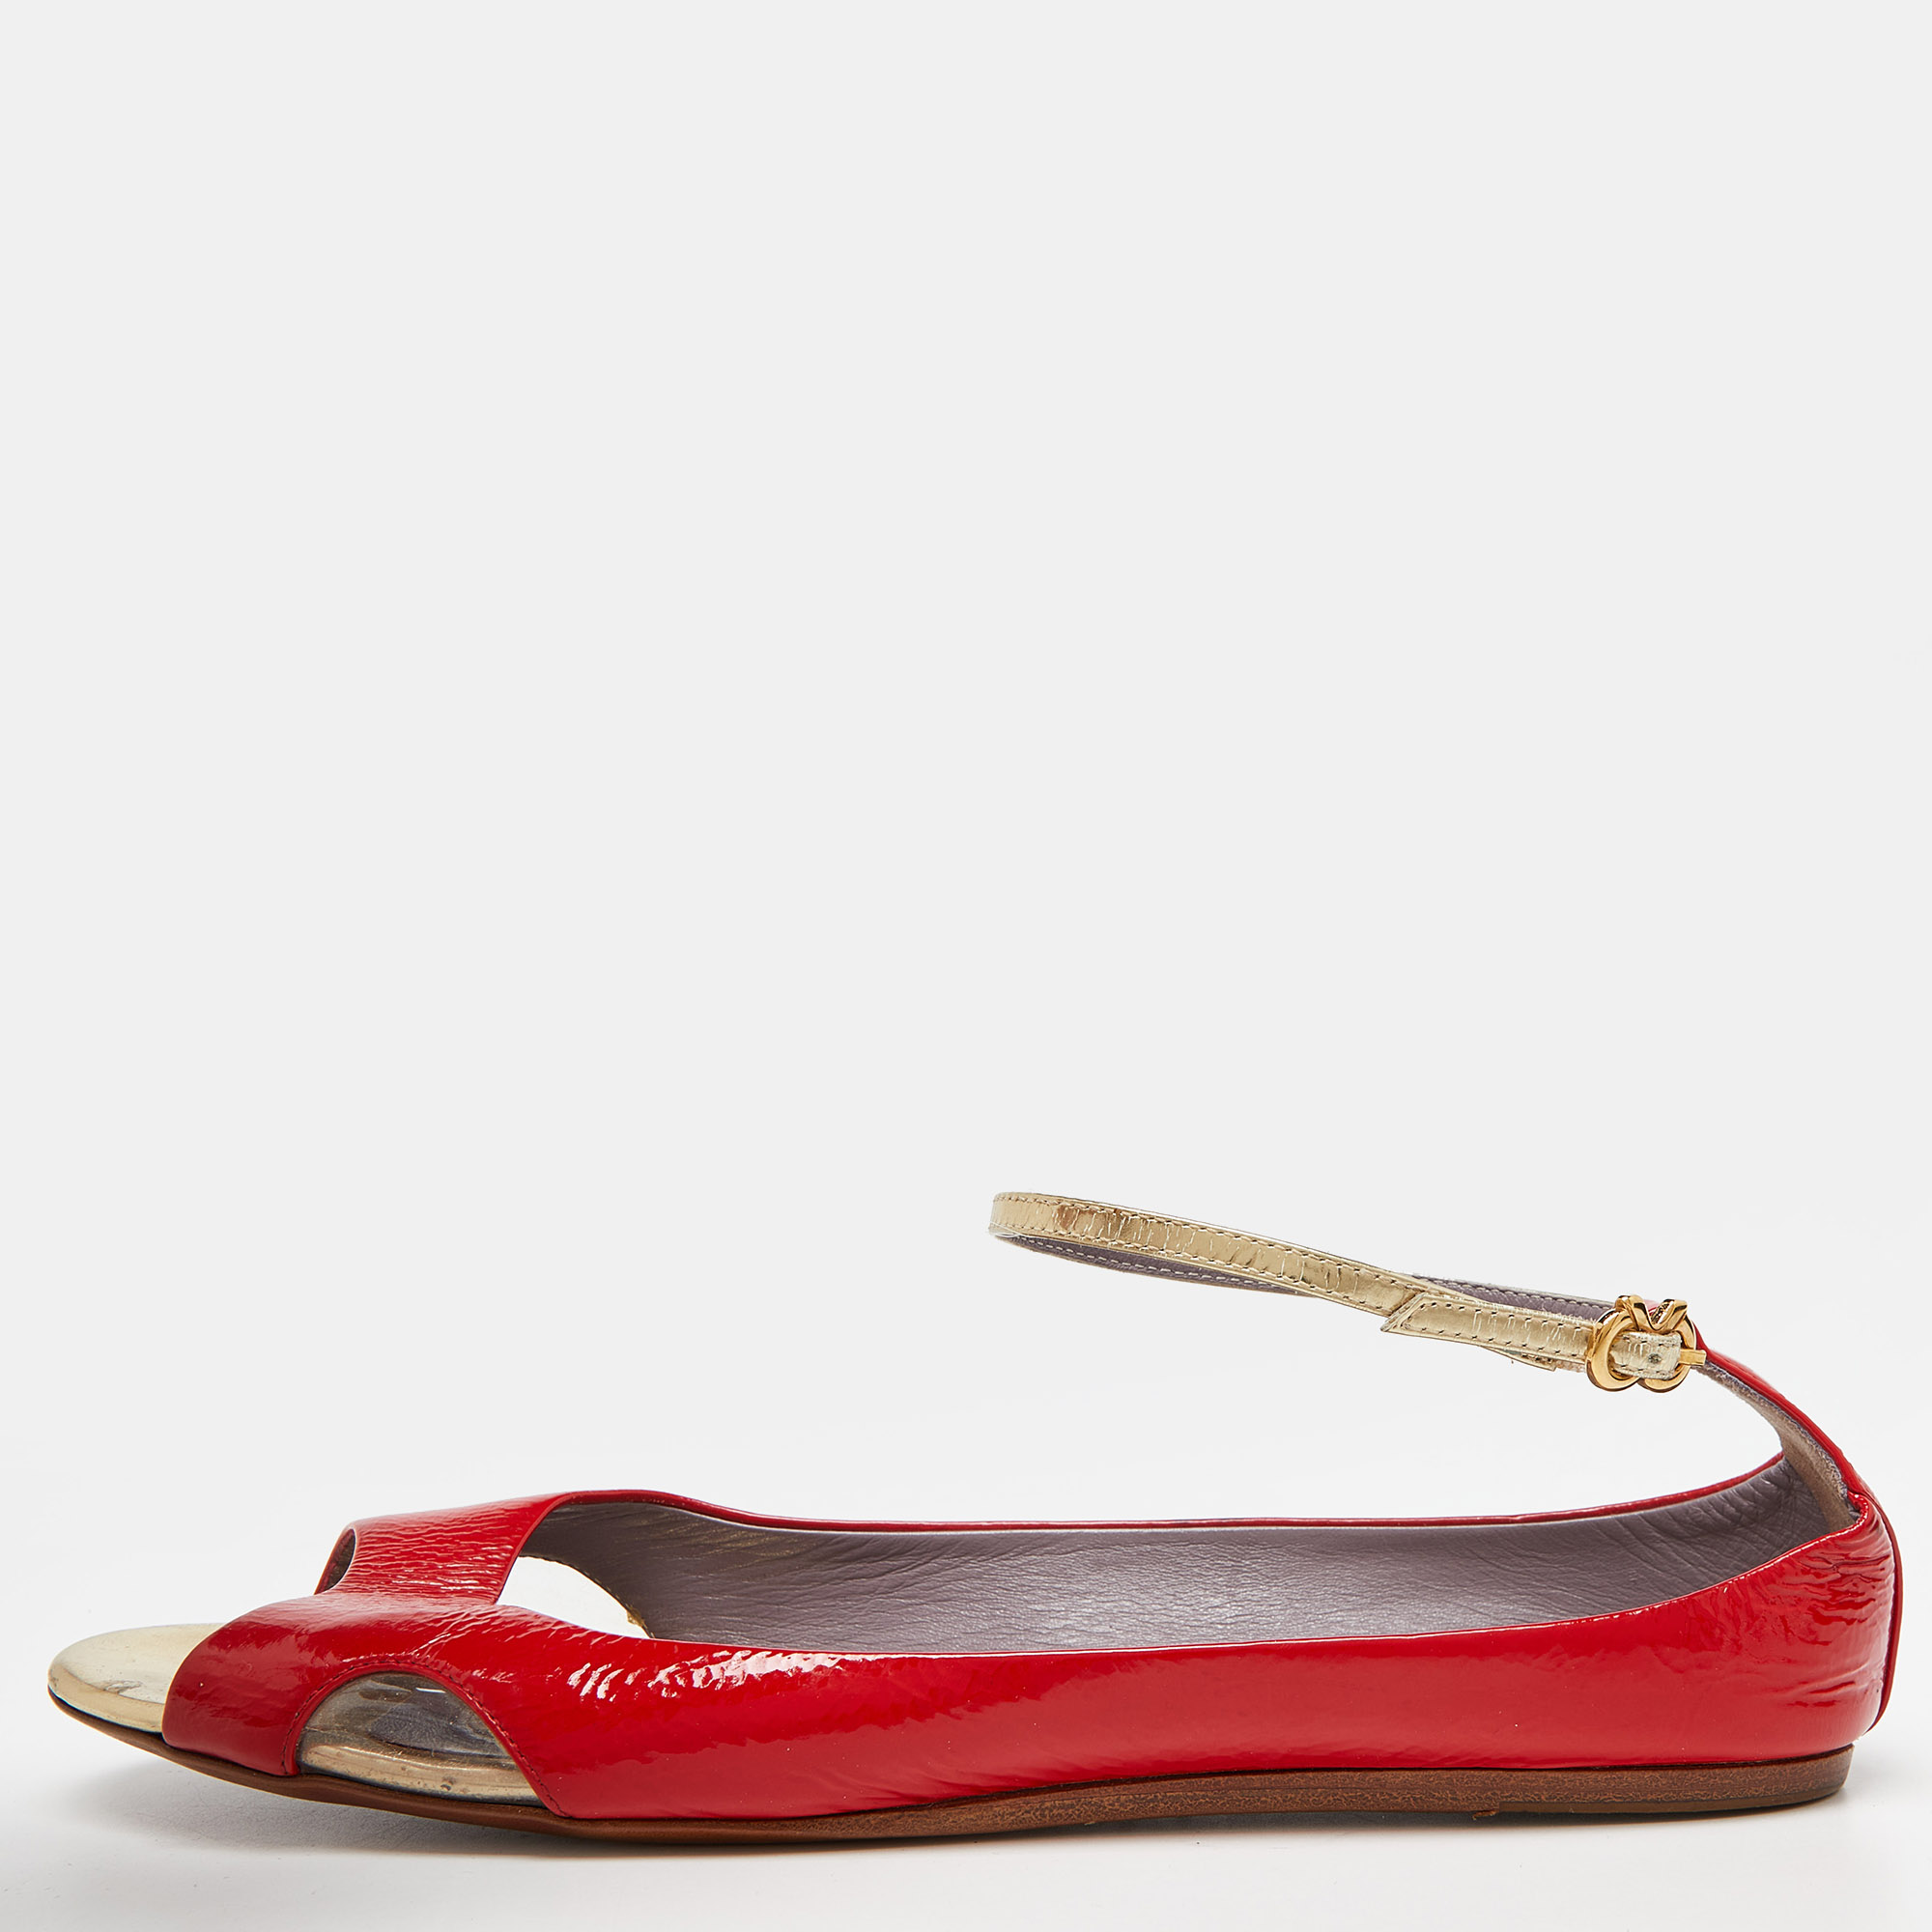 Anya Hindmarch Red Patent Leather Open Toe Ankle Strap Flats Size 39